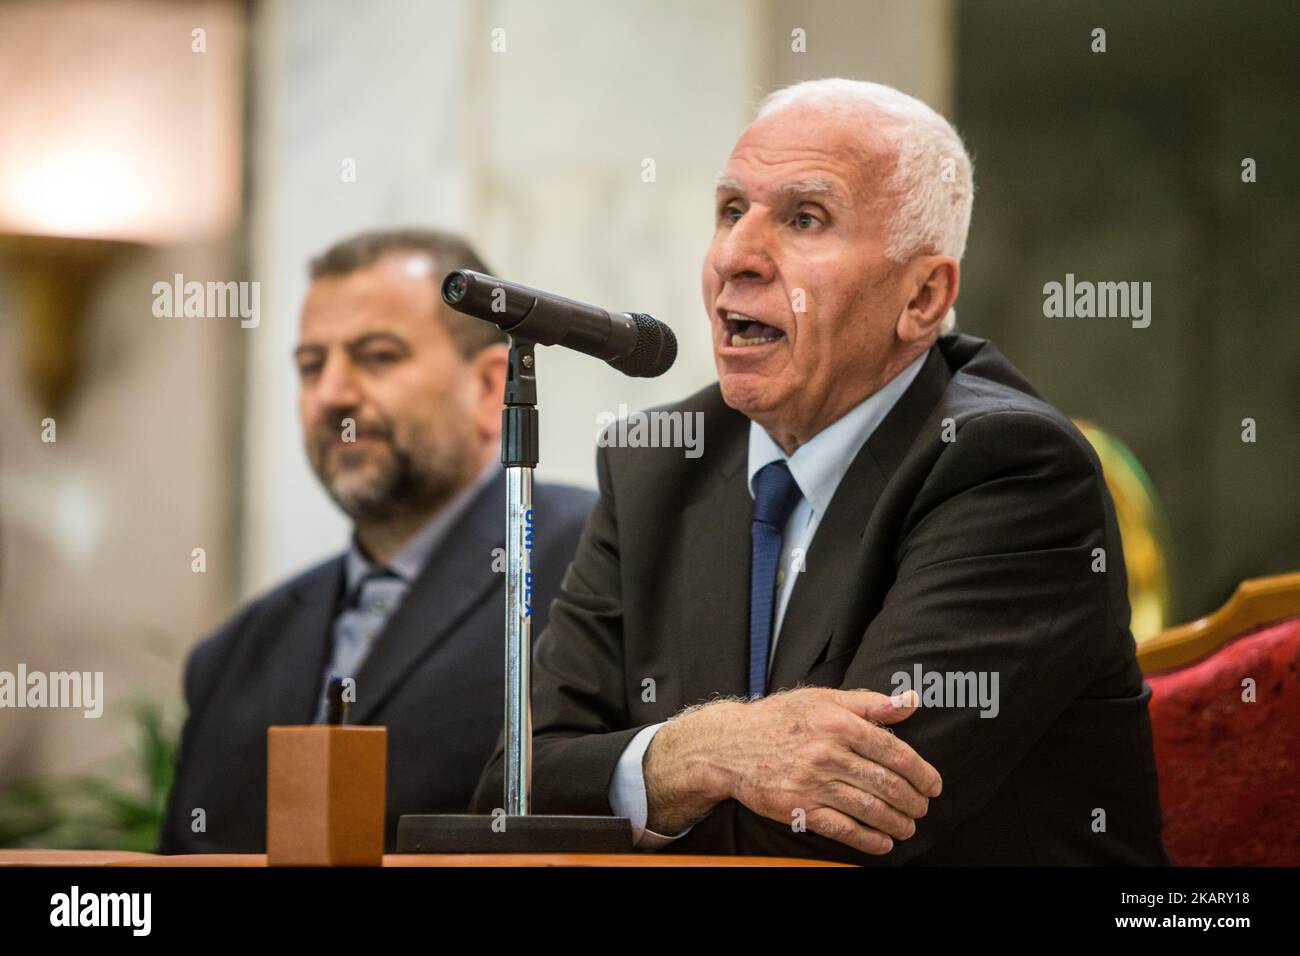 Hamas' representative, Saleh al-Arouri, is pictured during the signing of a reconciliation deal between the Islamic Resistence Movement (Hamas) and Fatah in Cairo, Egypt on October 12, 2017, as the two rival Palestinian movements ended their decade-long split following negotiations overseen by Egypt. Under the agreement, the West Bank-based Palestinian Authority is to resume full control of the Hamas-controlled Gaza Strip by December 1, according to a statement from Egypt's government. (Photo by Ibrahim Ezzat/NurPhoto) Stock Photo